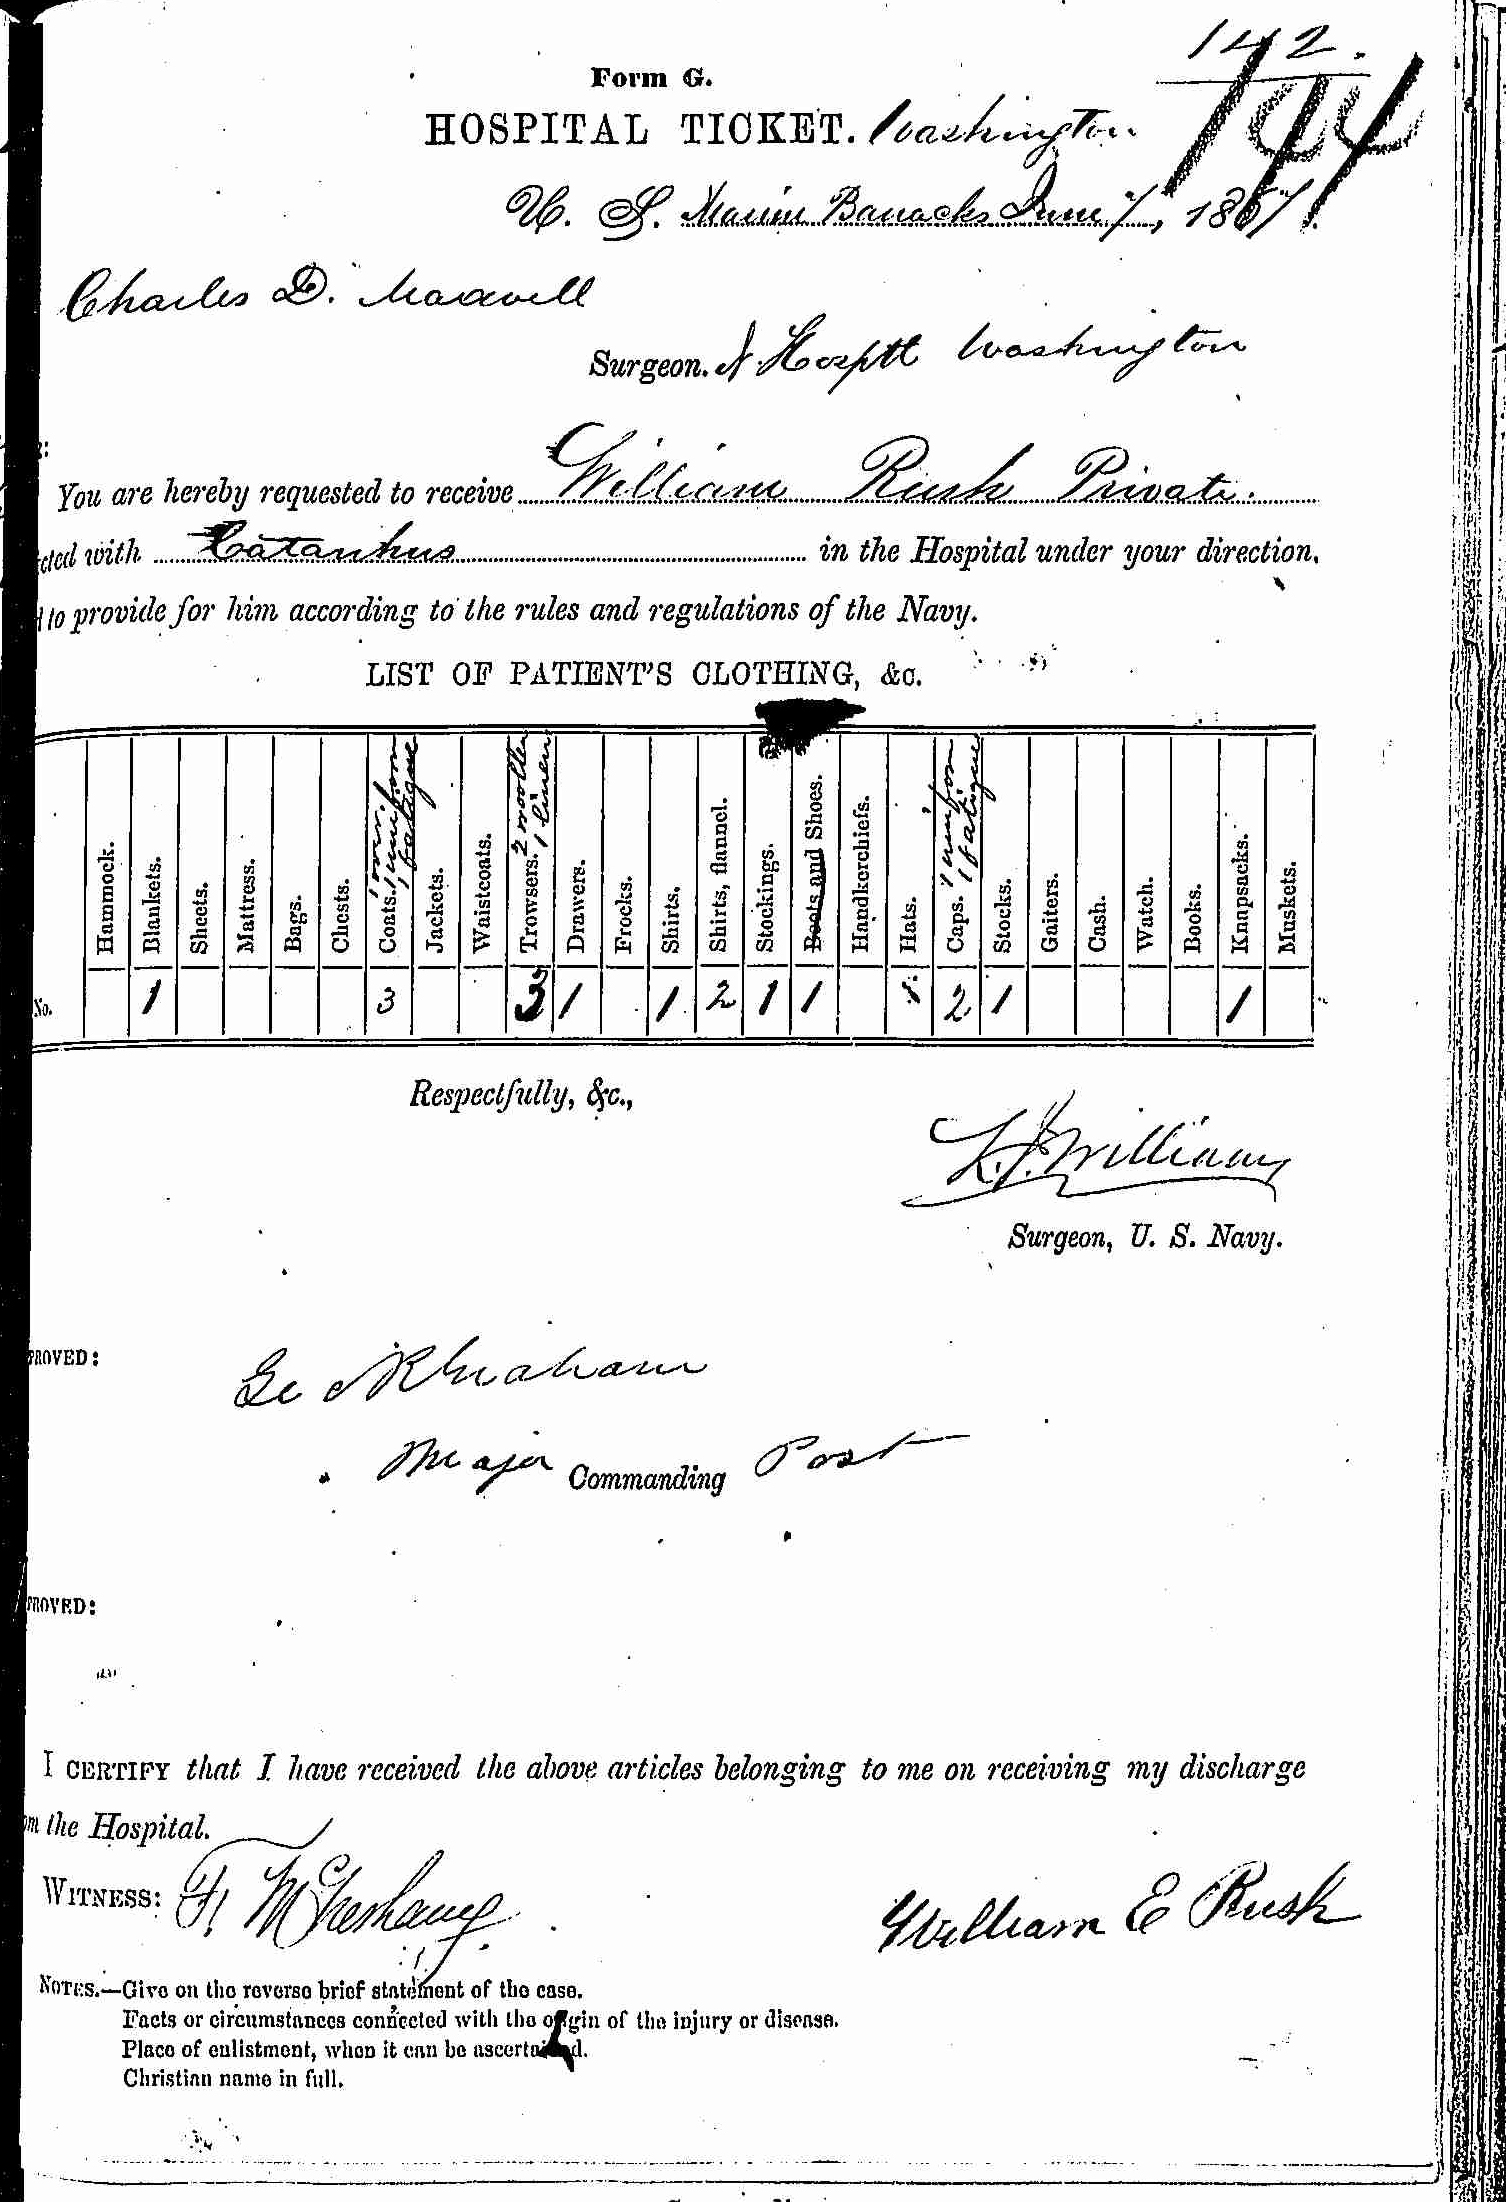 Entry for William Rush (page 1 of 2) in the log Hospital Tickets and Case Papers - Naval Hospital - Washington, D.C. - 1866-68